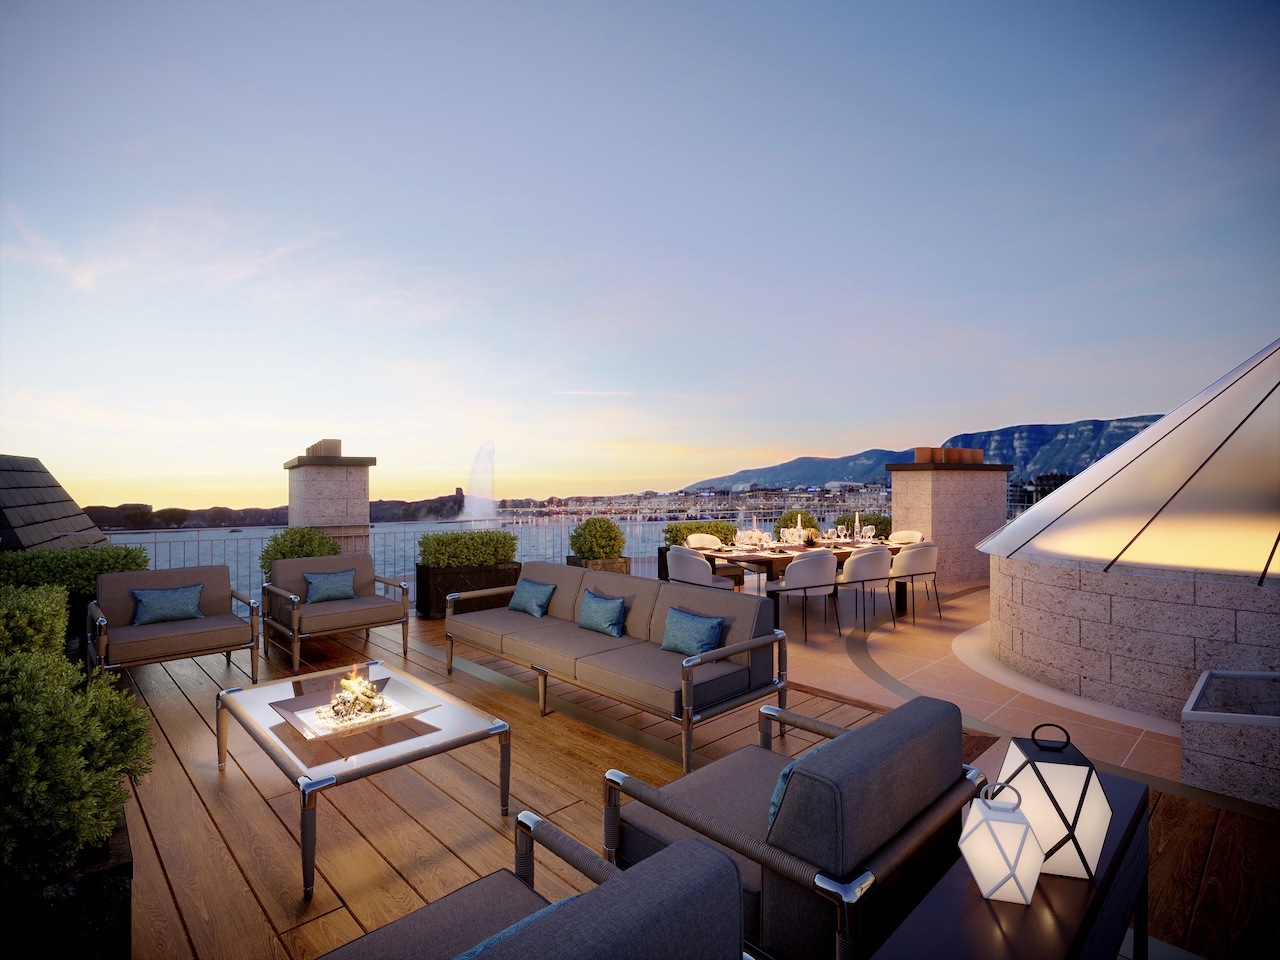 Ultima Collection has welcomed Ultima Geneva Quai Wilson, a sophisticated luxury retreat located in the heart of Geneva.